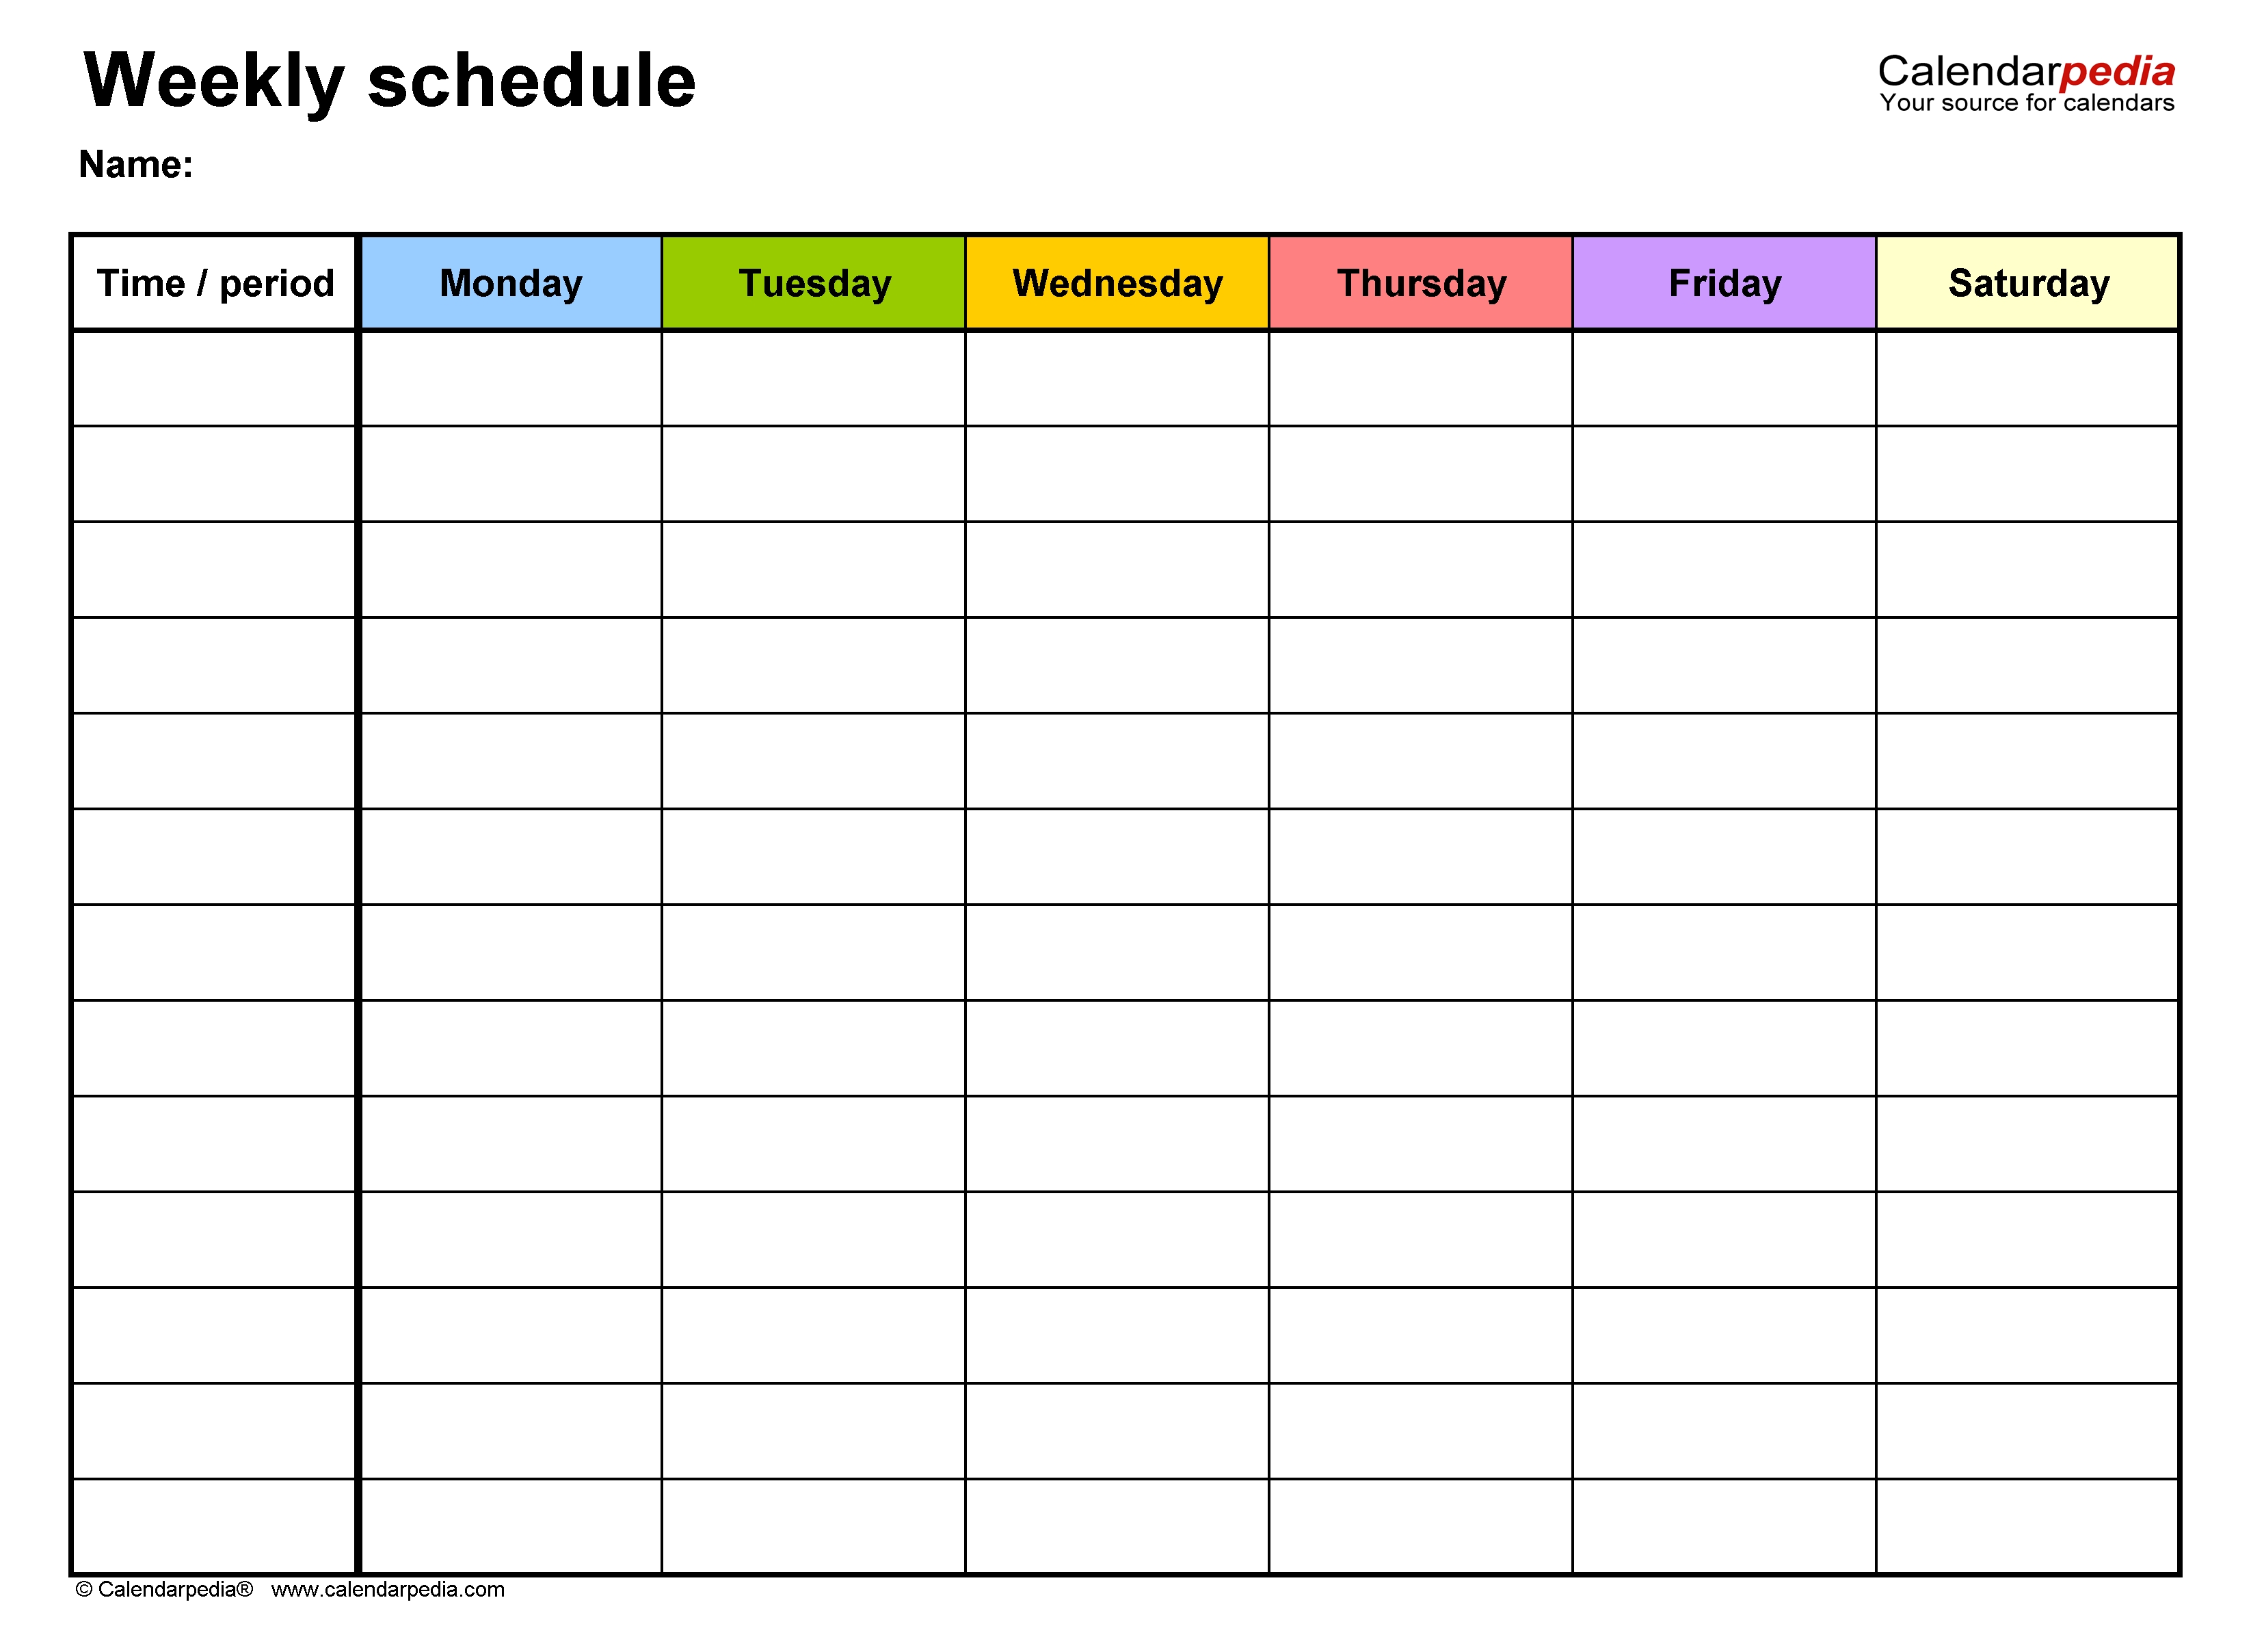 Free Weekly Schedules For Excel - 18 Templates 7 Day Calendar Template Excel